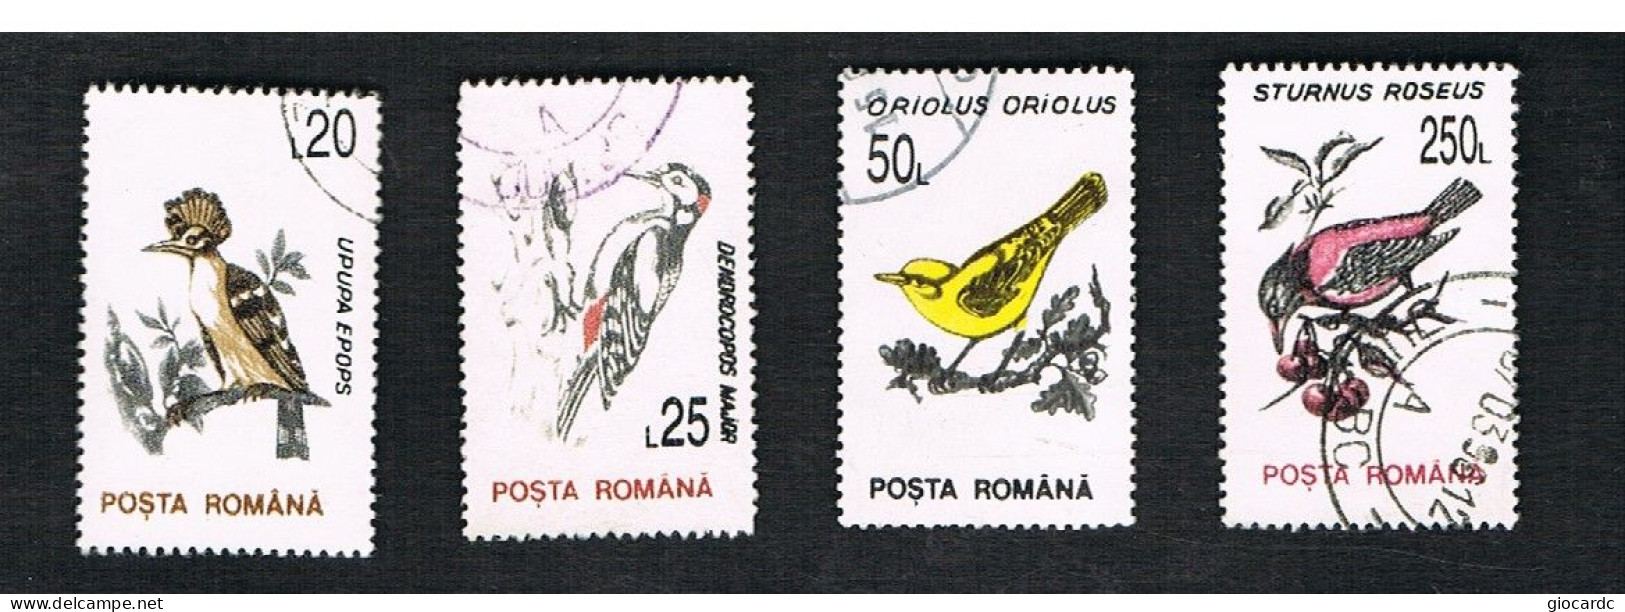 ROMANIA - SG 5510.5509  - 1993  CURRENT SERIE: BIRDS (4 STAMPS OF THE SET ON WHITE PAPER)  - USED ° - - Gebruikt